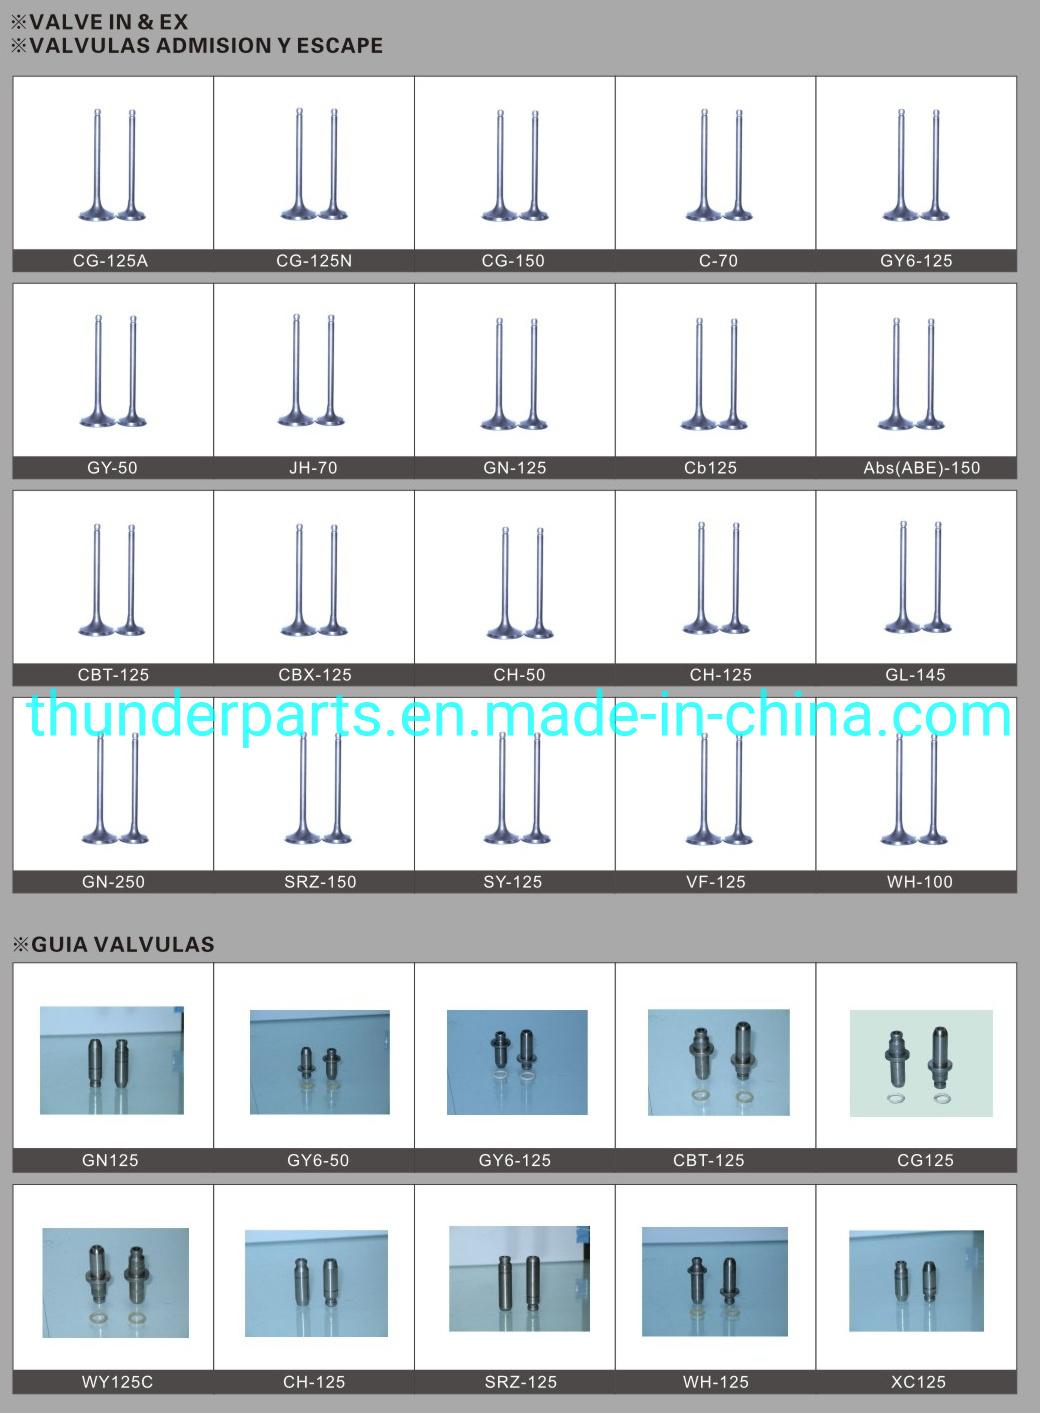 Motorcycle Spare Part Motorcycle Engine Valves in & Ex for Crypton T105 T110, Ybr125, Yb125, Ys150